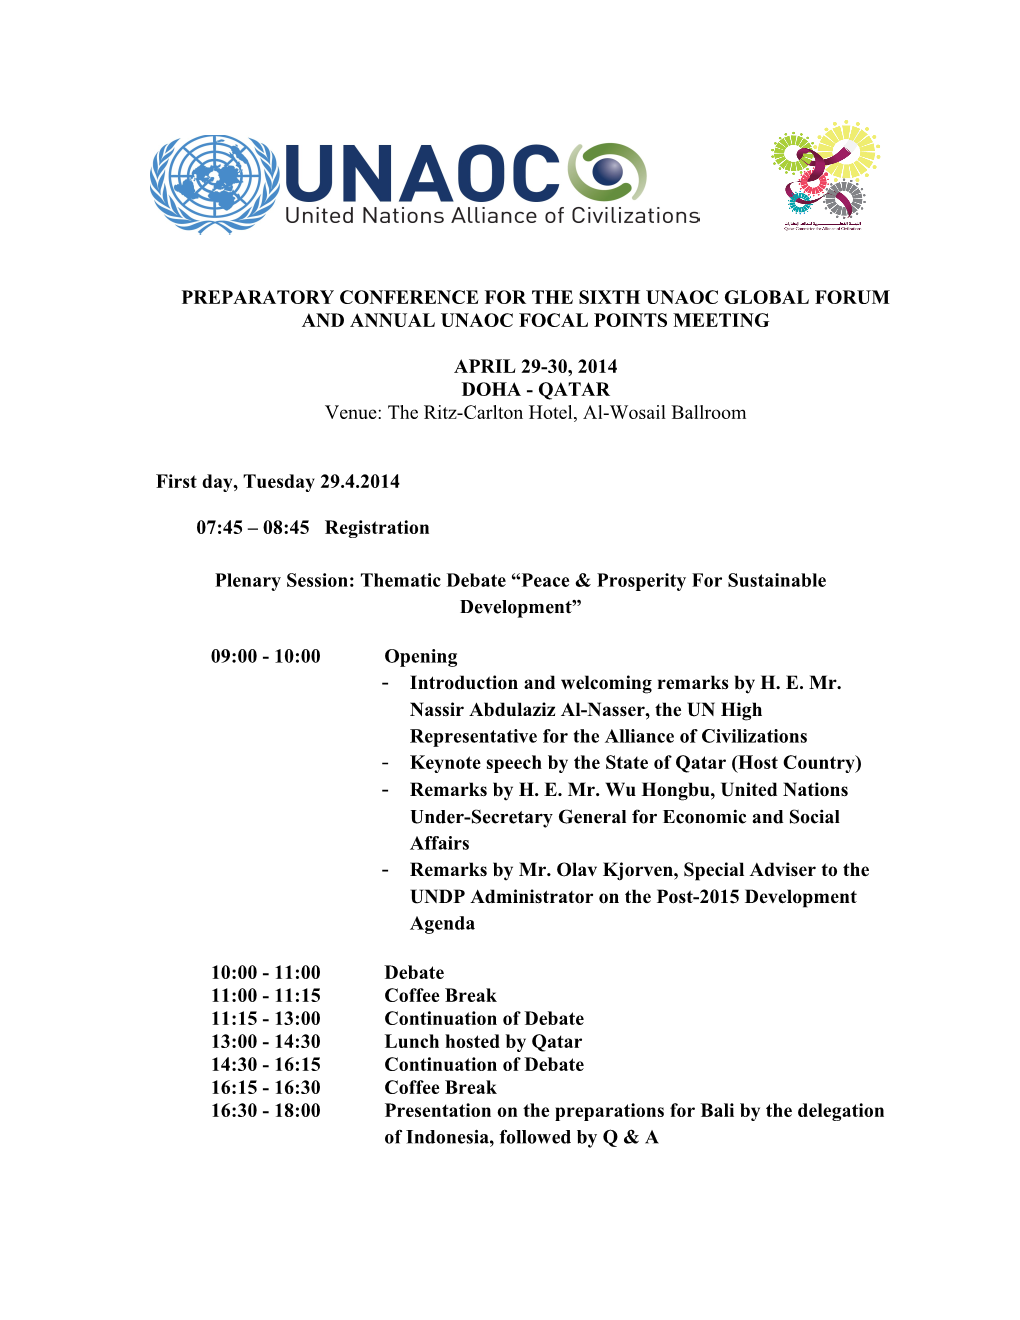 Preparatory Conference for the Sixth Unaoc Global Forum